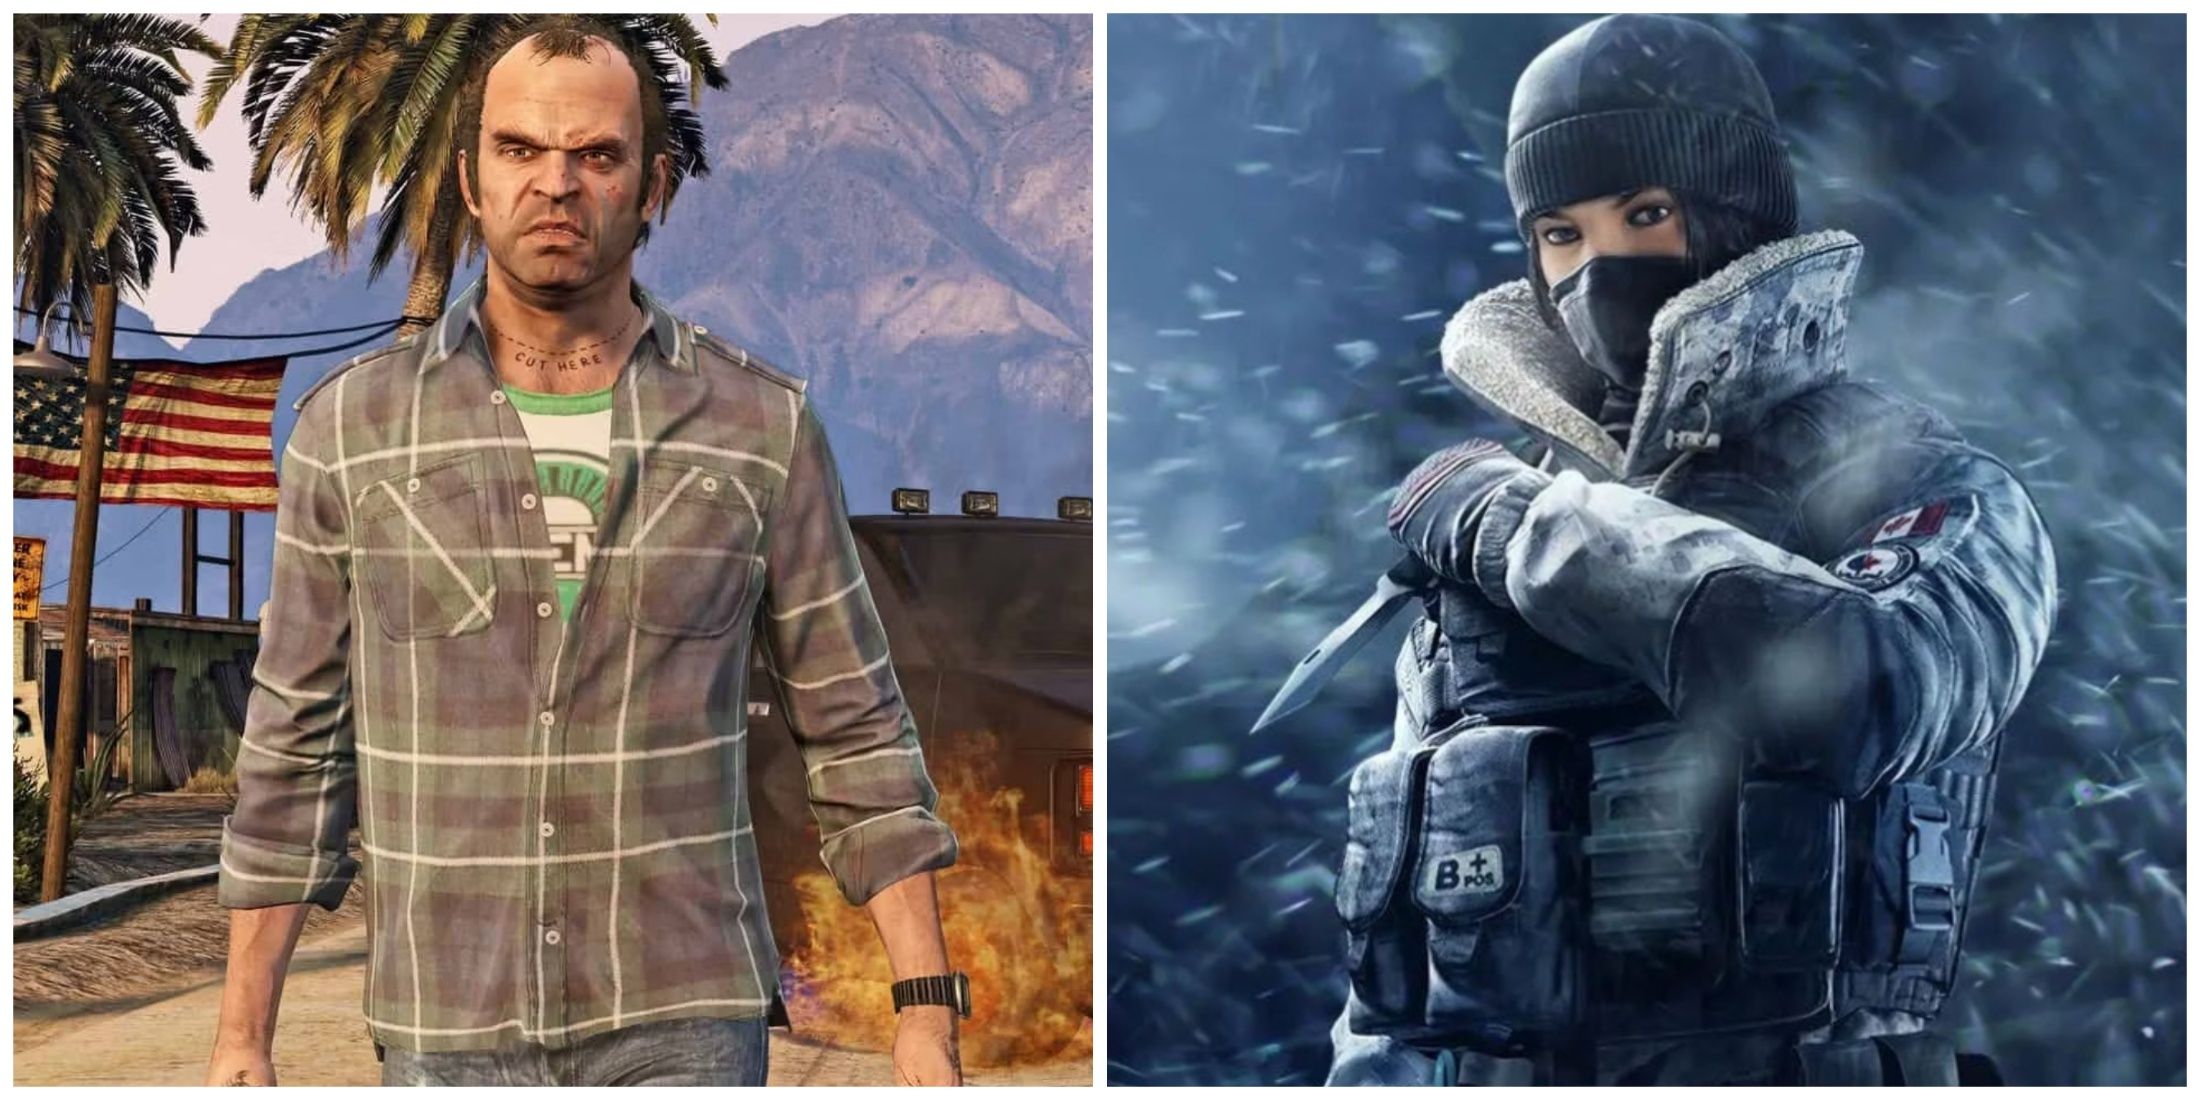 Trevor Phillips in Grand Theft Auto and Frost in Rainbow Six Siege